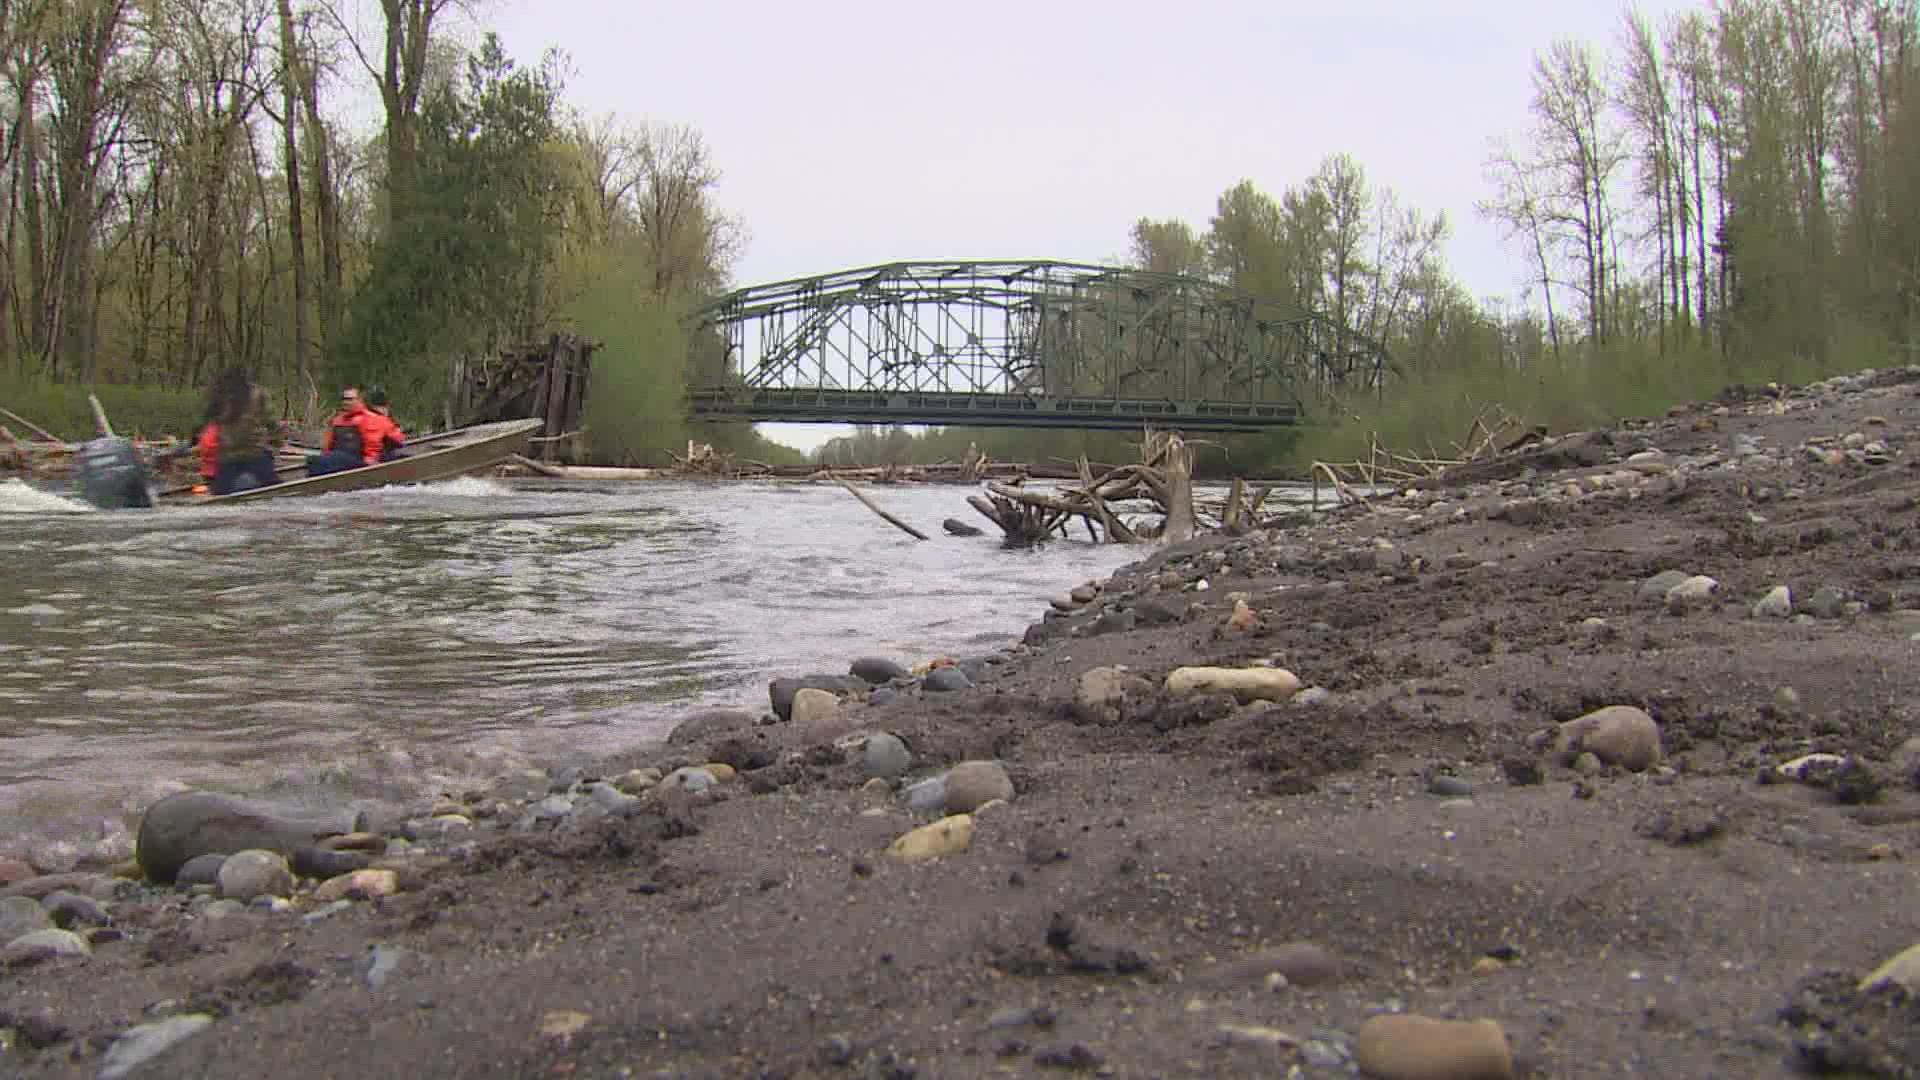 A U.S. Geological survey warns the bridge could be wiped out by a flood within the next 20 years. However, solutions could cost more than $4 billion.